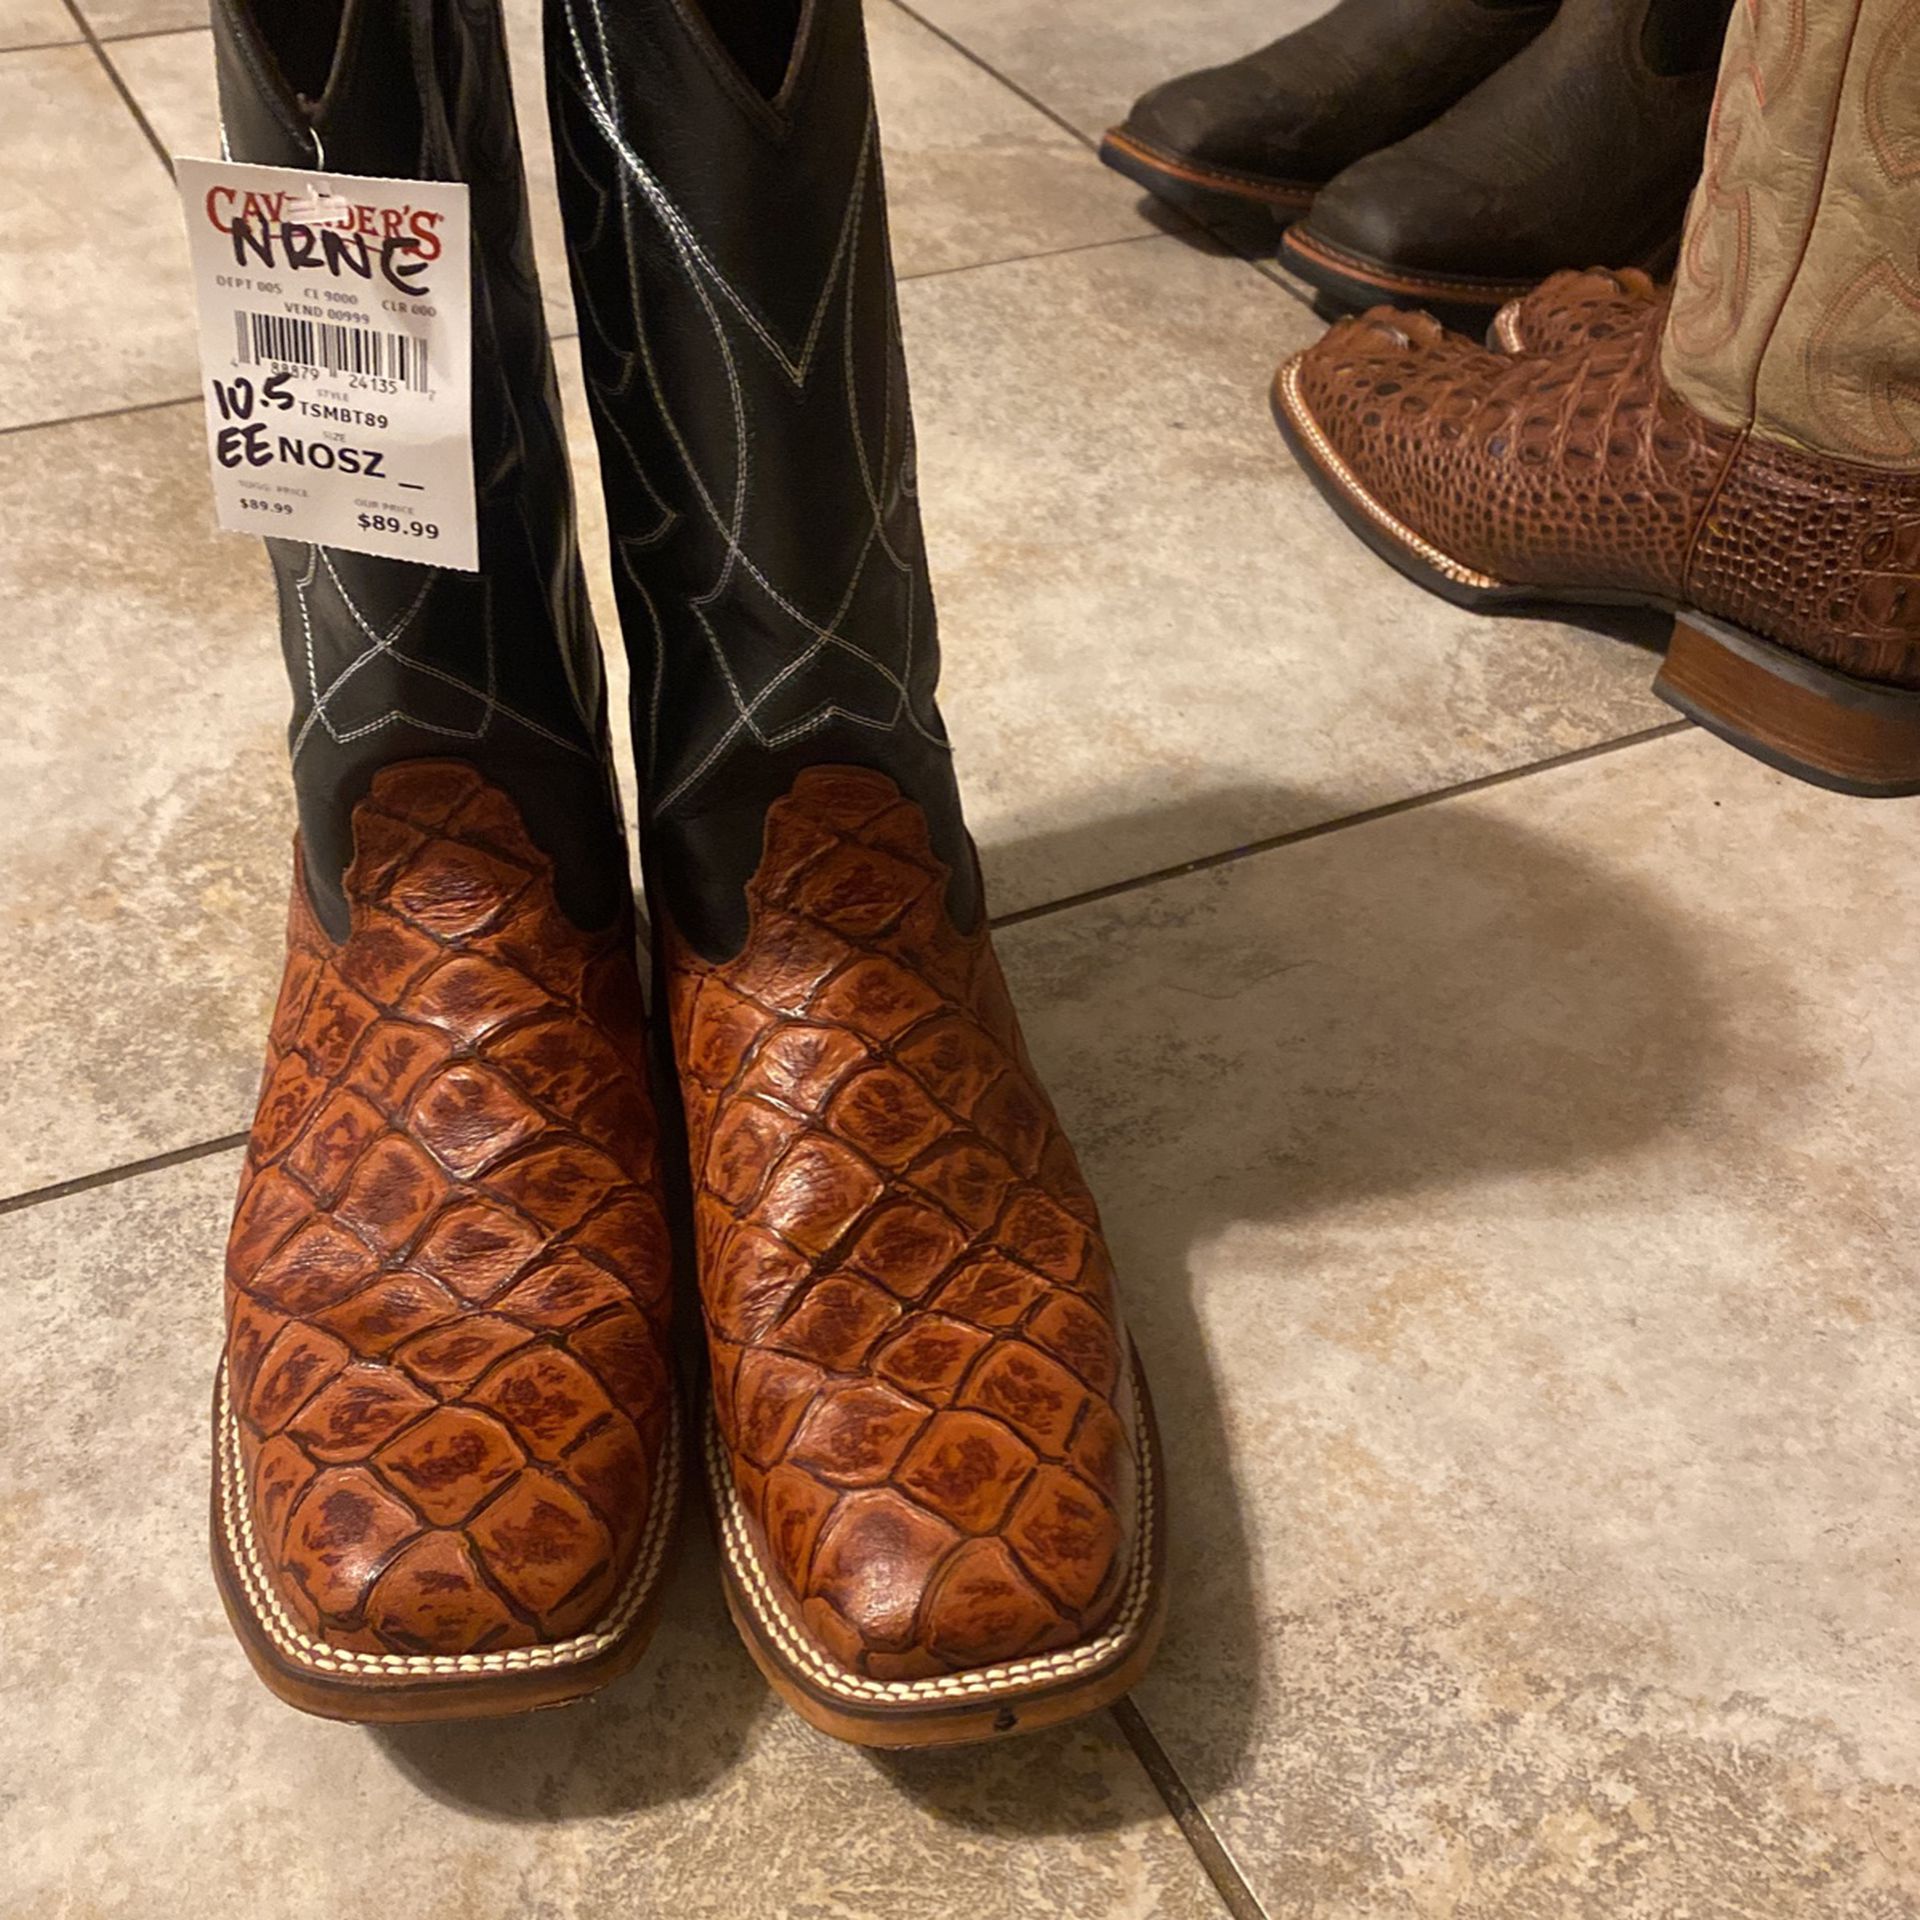 New Nocona Boots 10.5EE 55.00 From Cavenders 